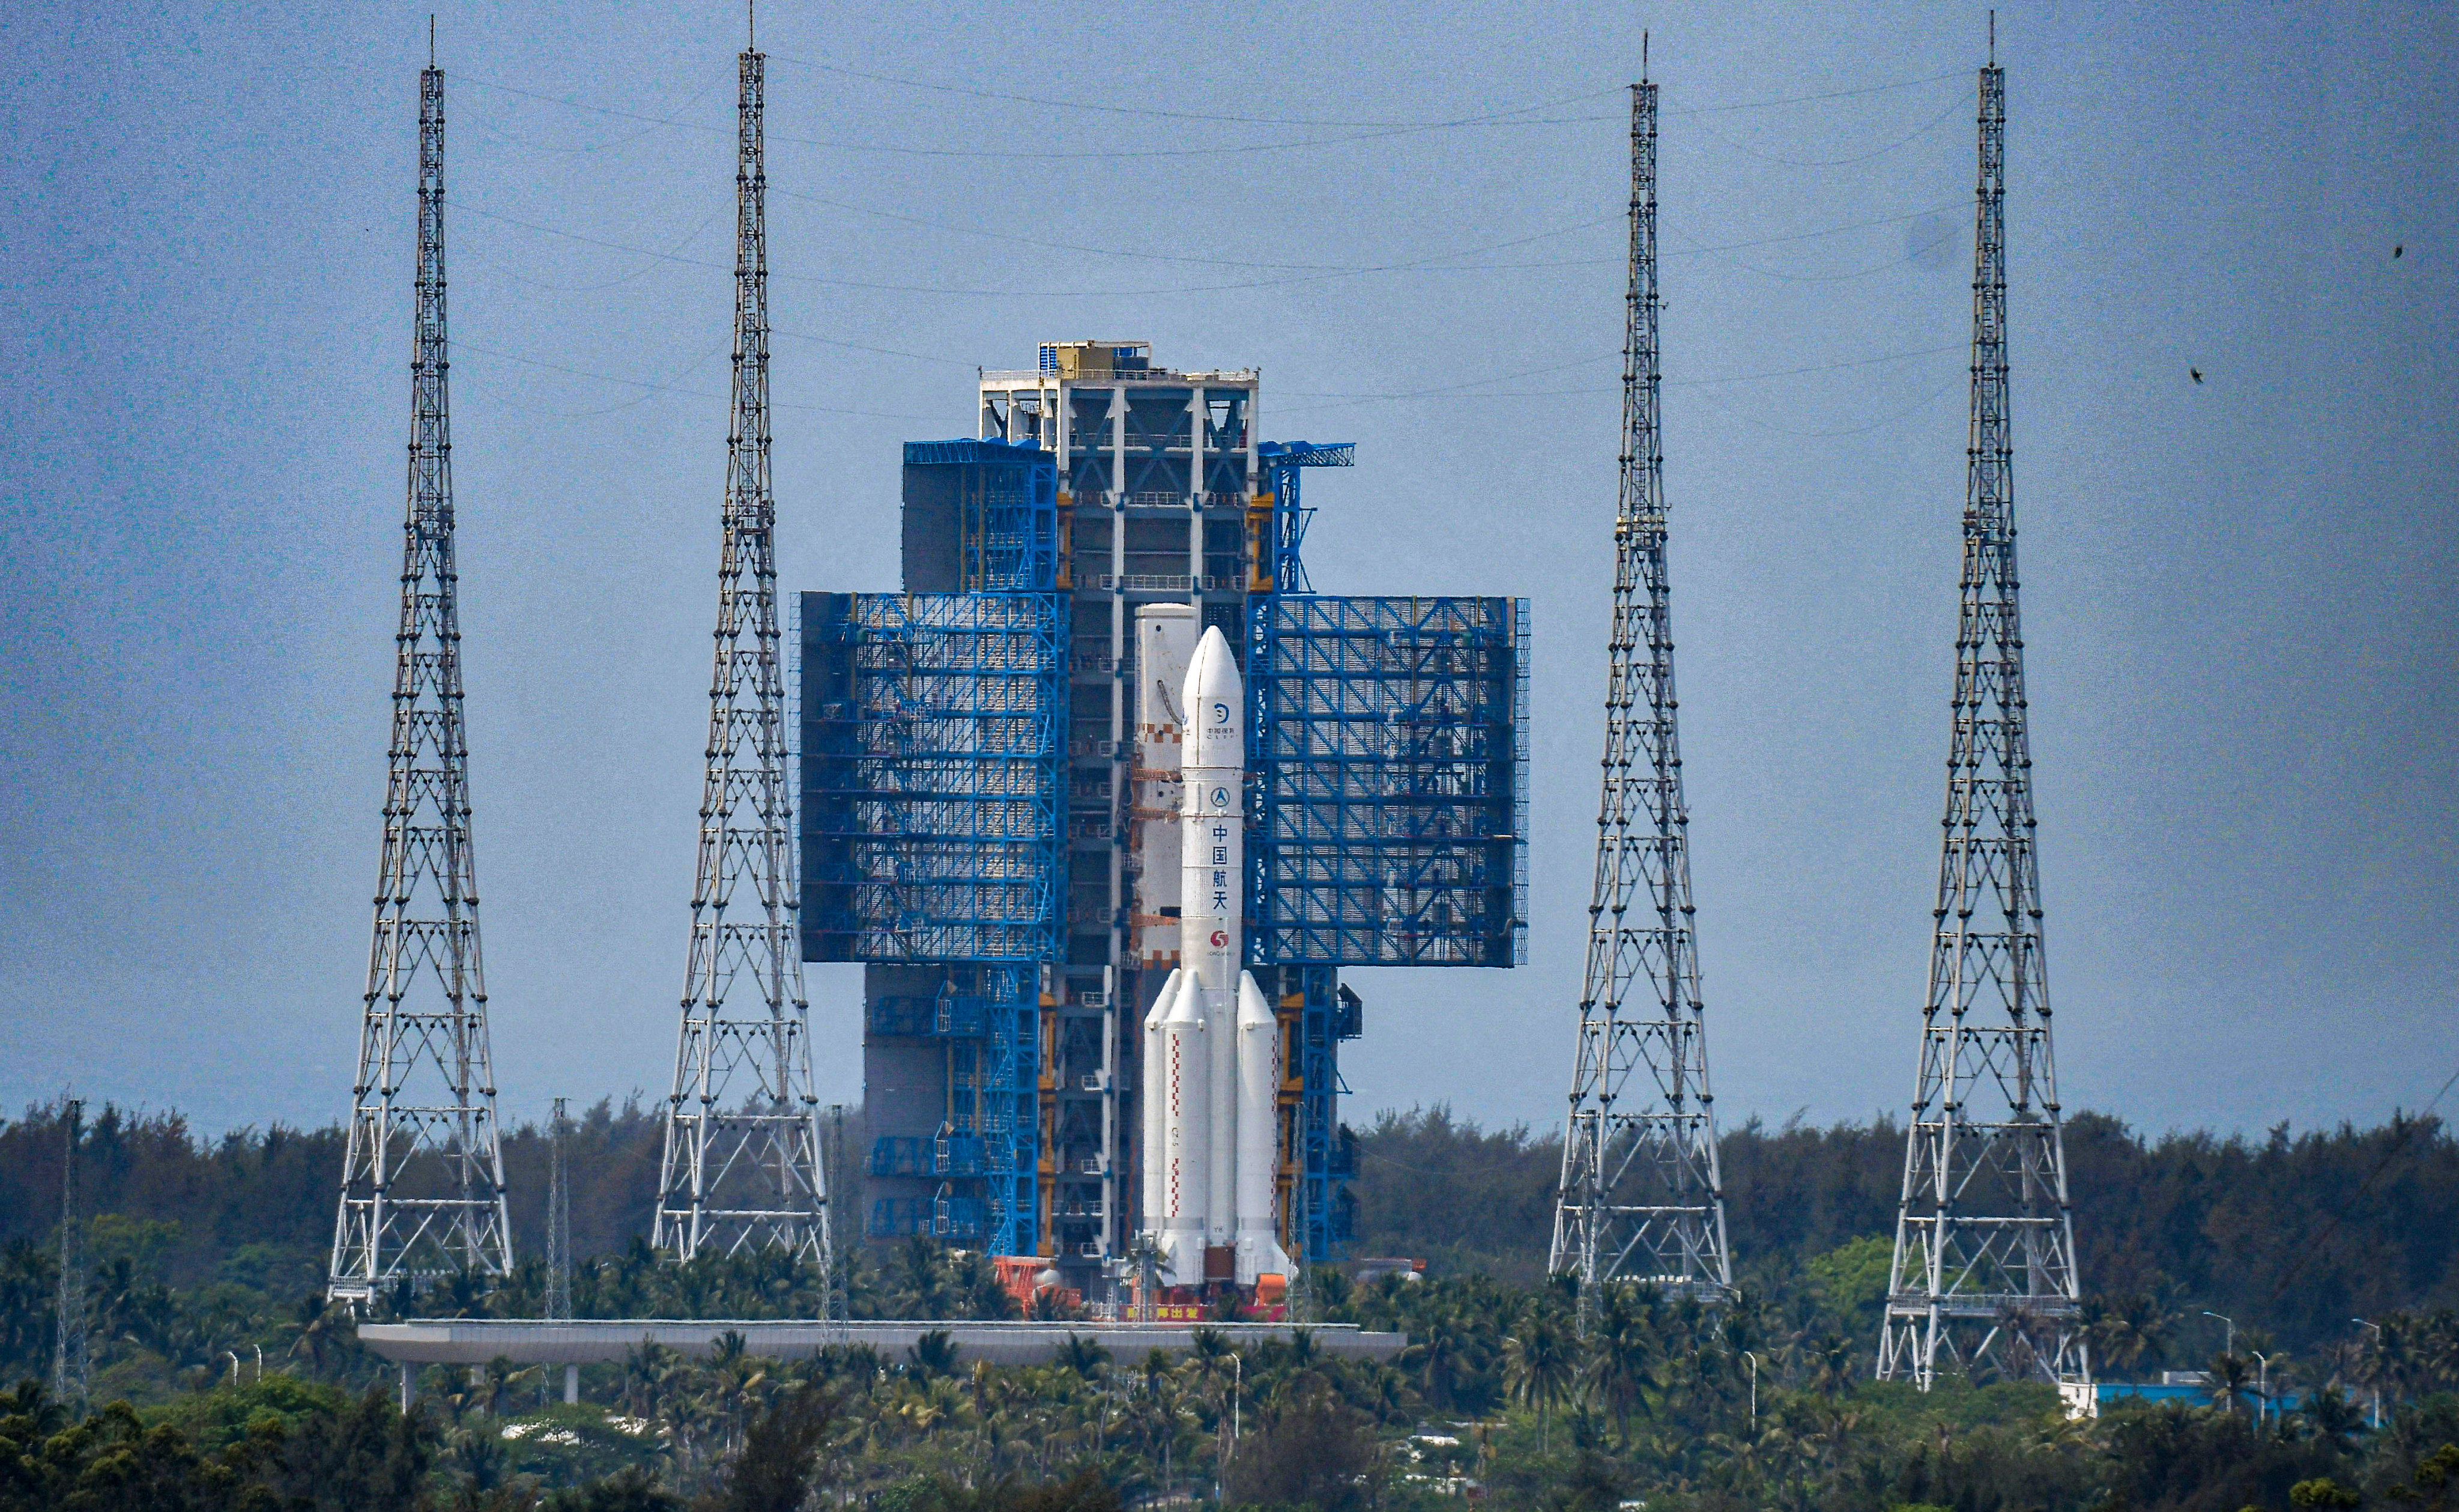 China’s Chang’e 6 lunar probe and a Long March-5 Y8 carrier rocket combination sit on a launch pad at the Wenchang Space Launch Site in Hainan province on April 27. Photo: cnsphoto via Reuters